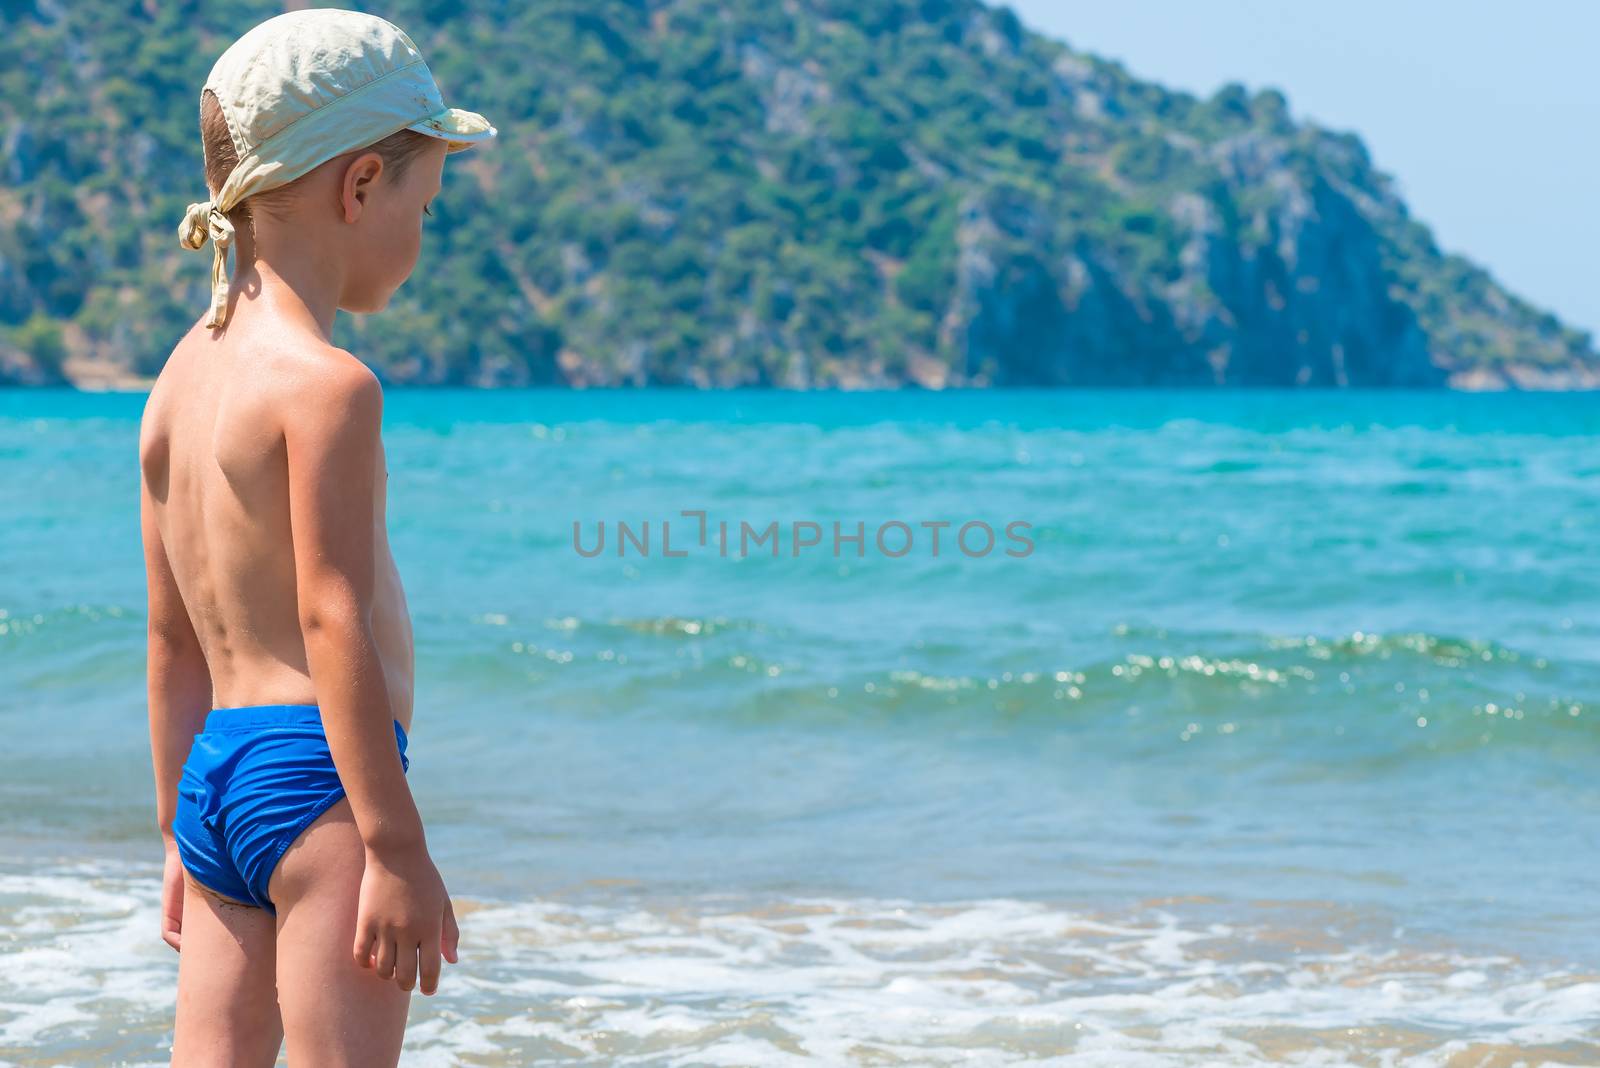 5 years old boy in swimming trunks is looking at waves by kosmsos111